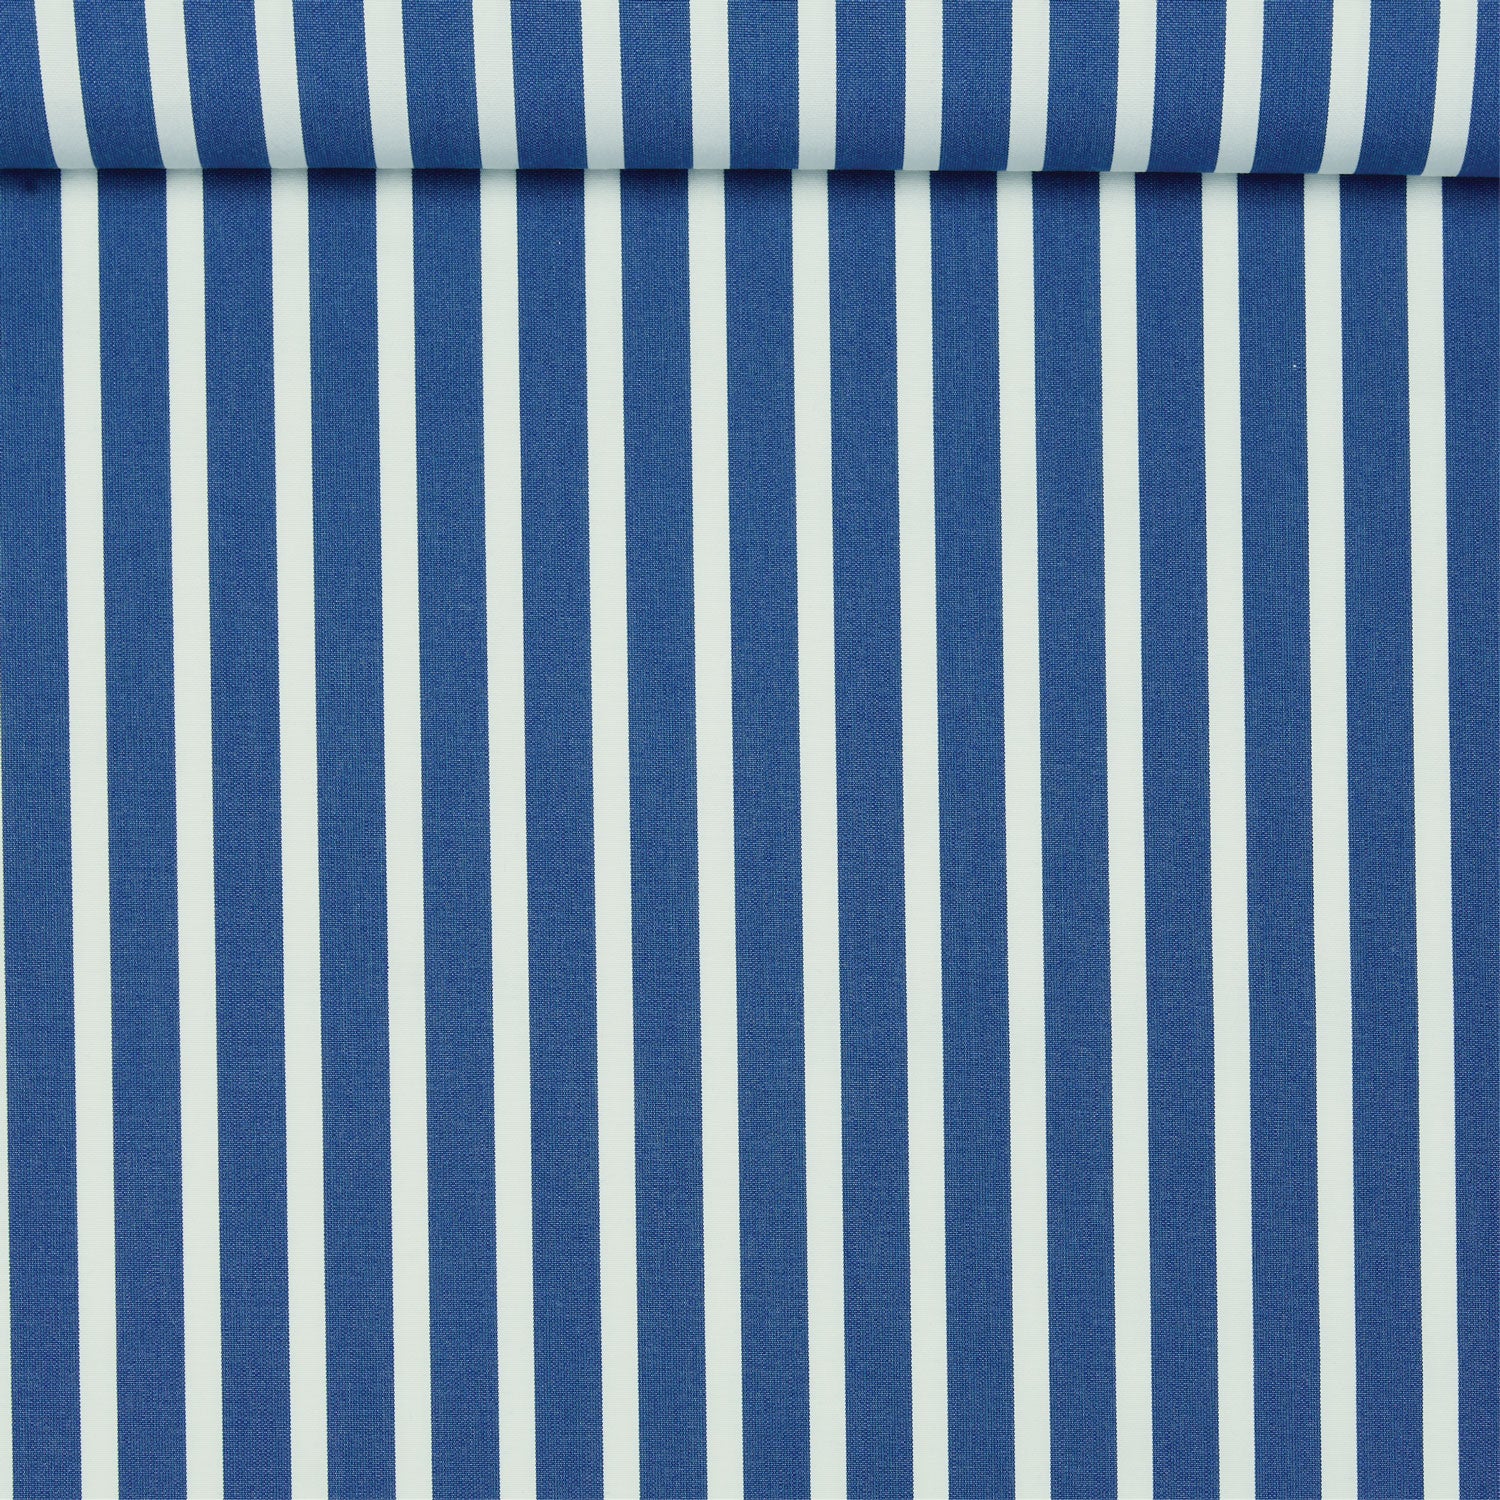 A birds eye view of a jacquard woven white and blue striped pattern outdoor performance fabric roll. 